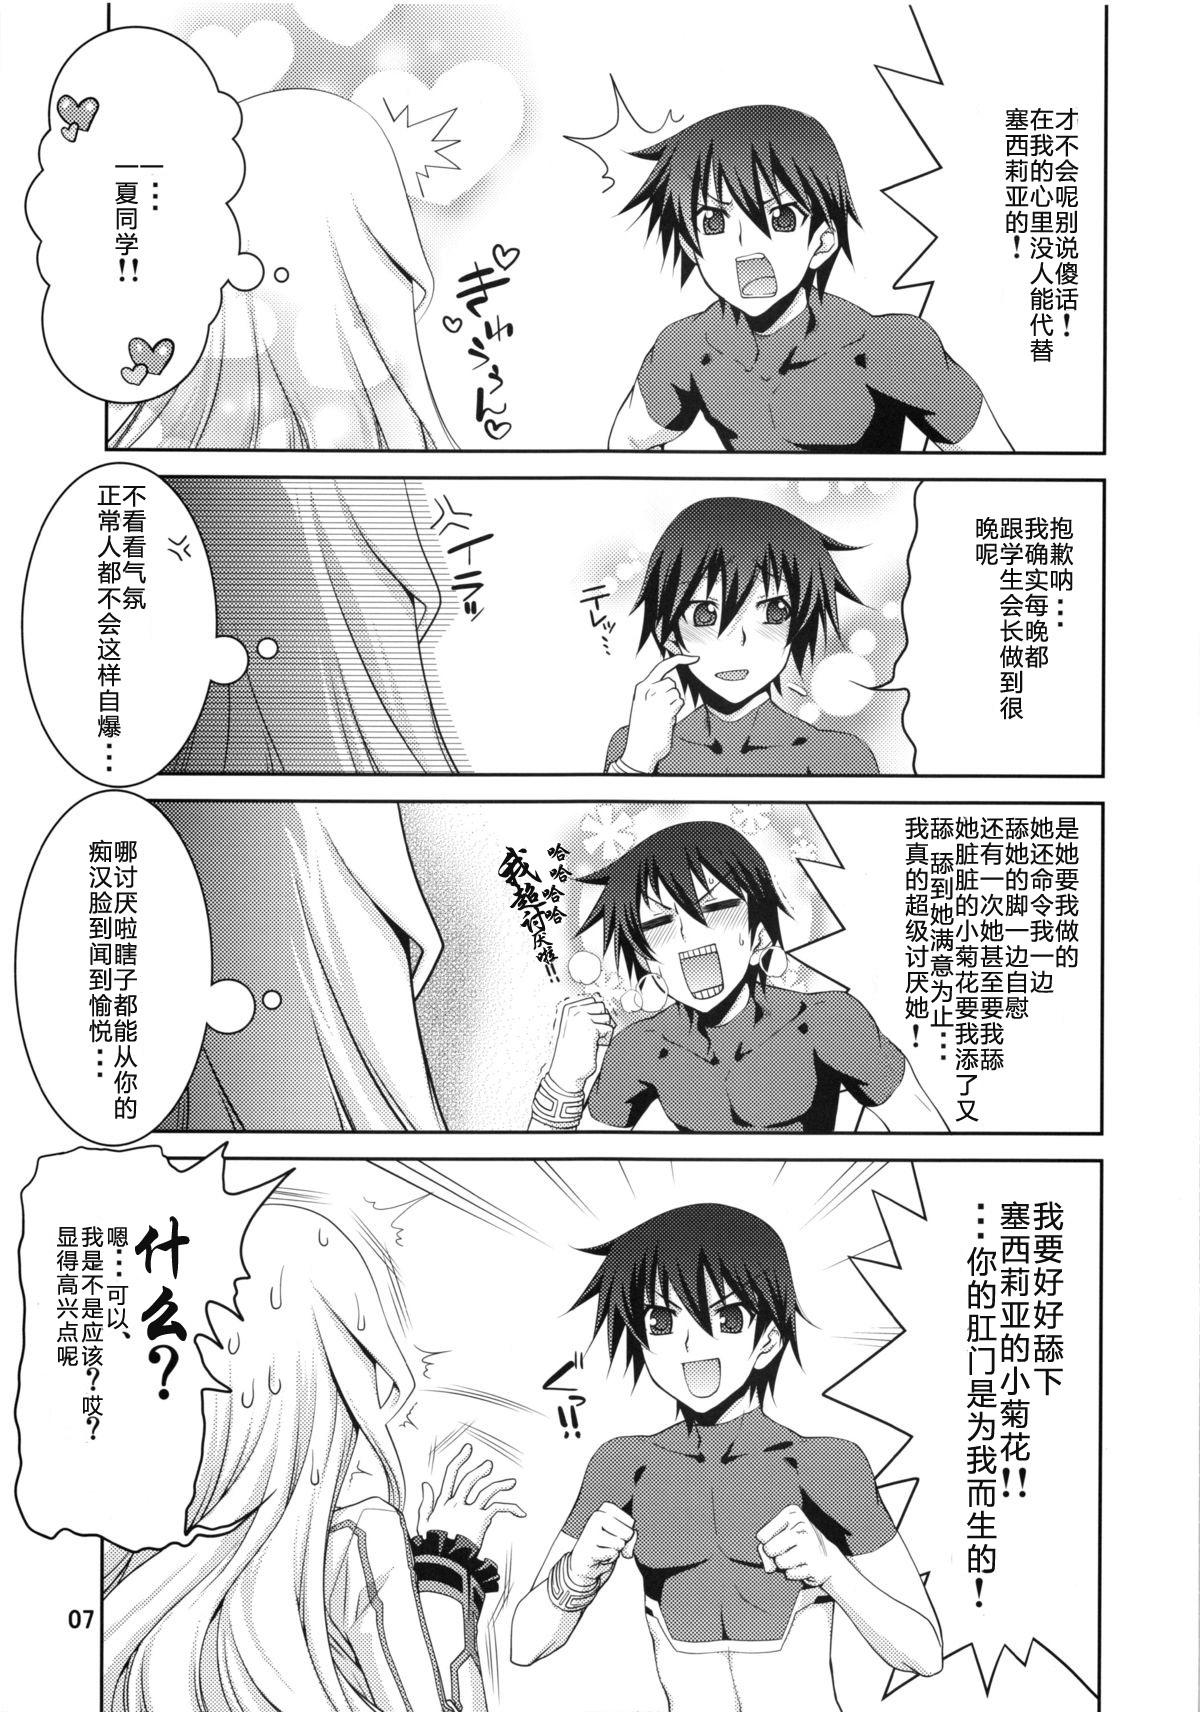 Pure 18 IS 2 - Infinite stratos Music - Page 6